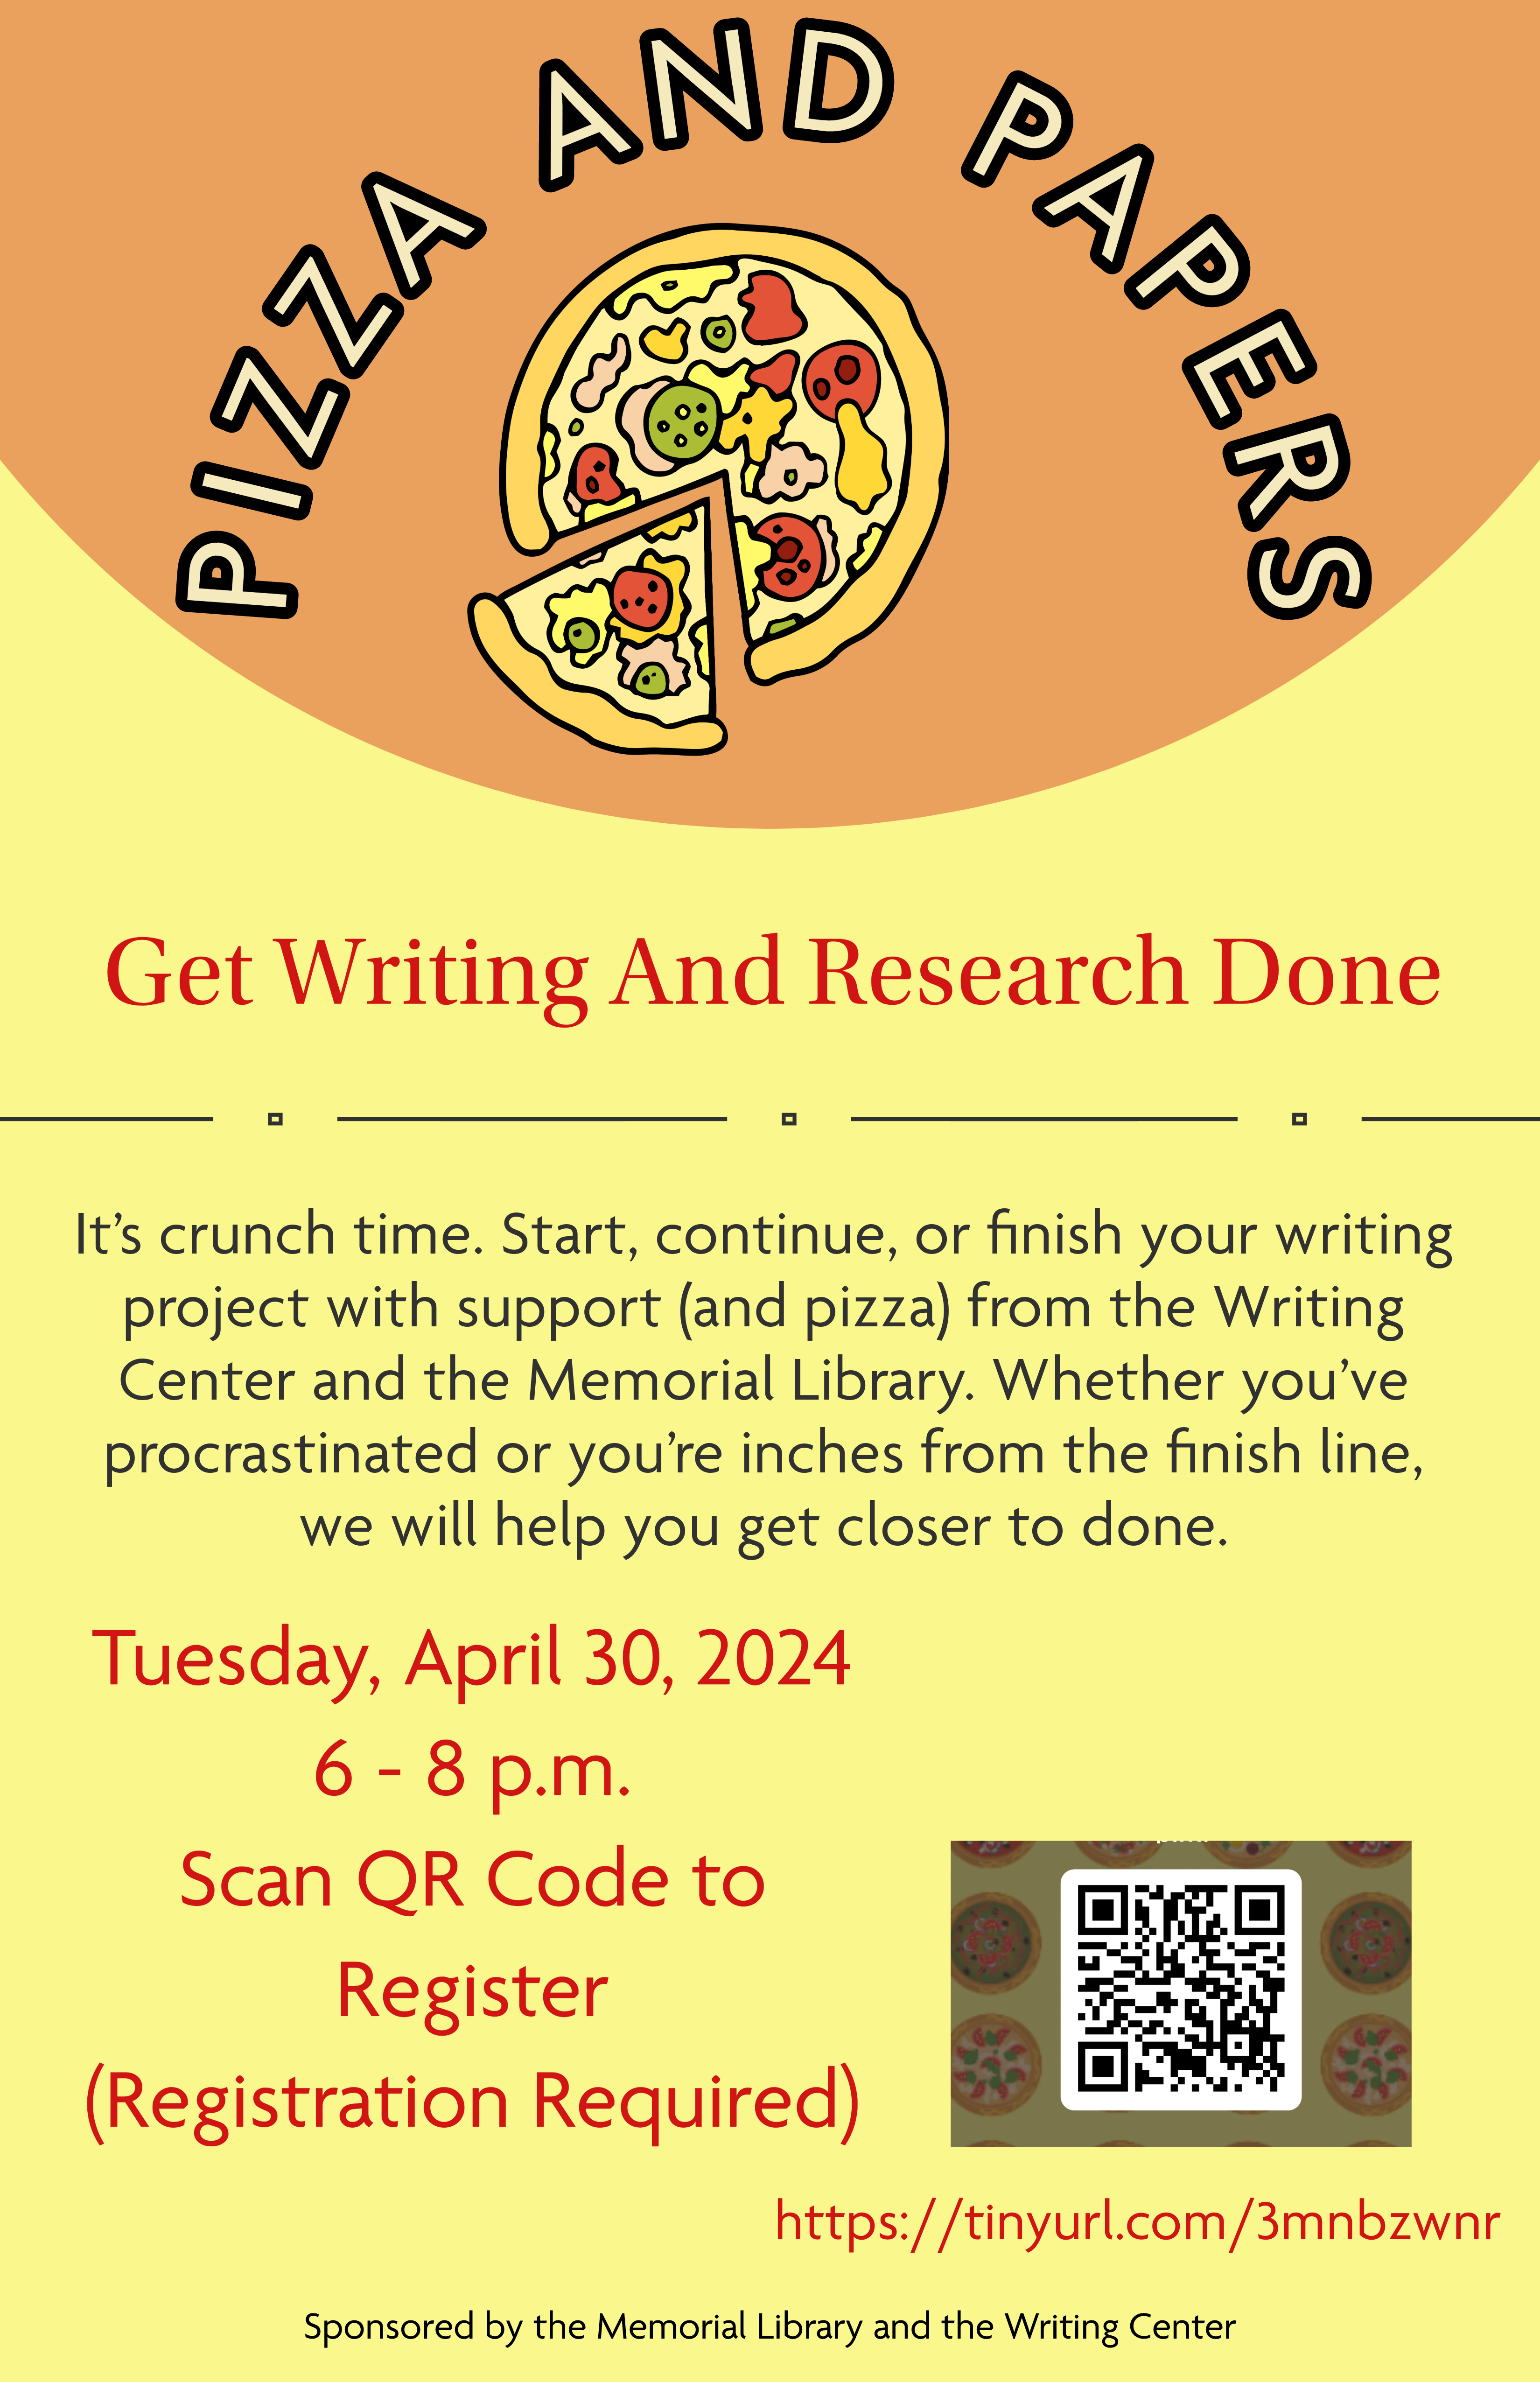 Get Writing and Research Done on Tuesday April 30th 6-8 PM


Registration is Required https://tinyurl.com/3mnbzwnr